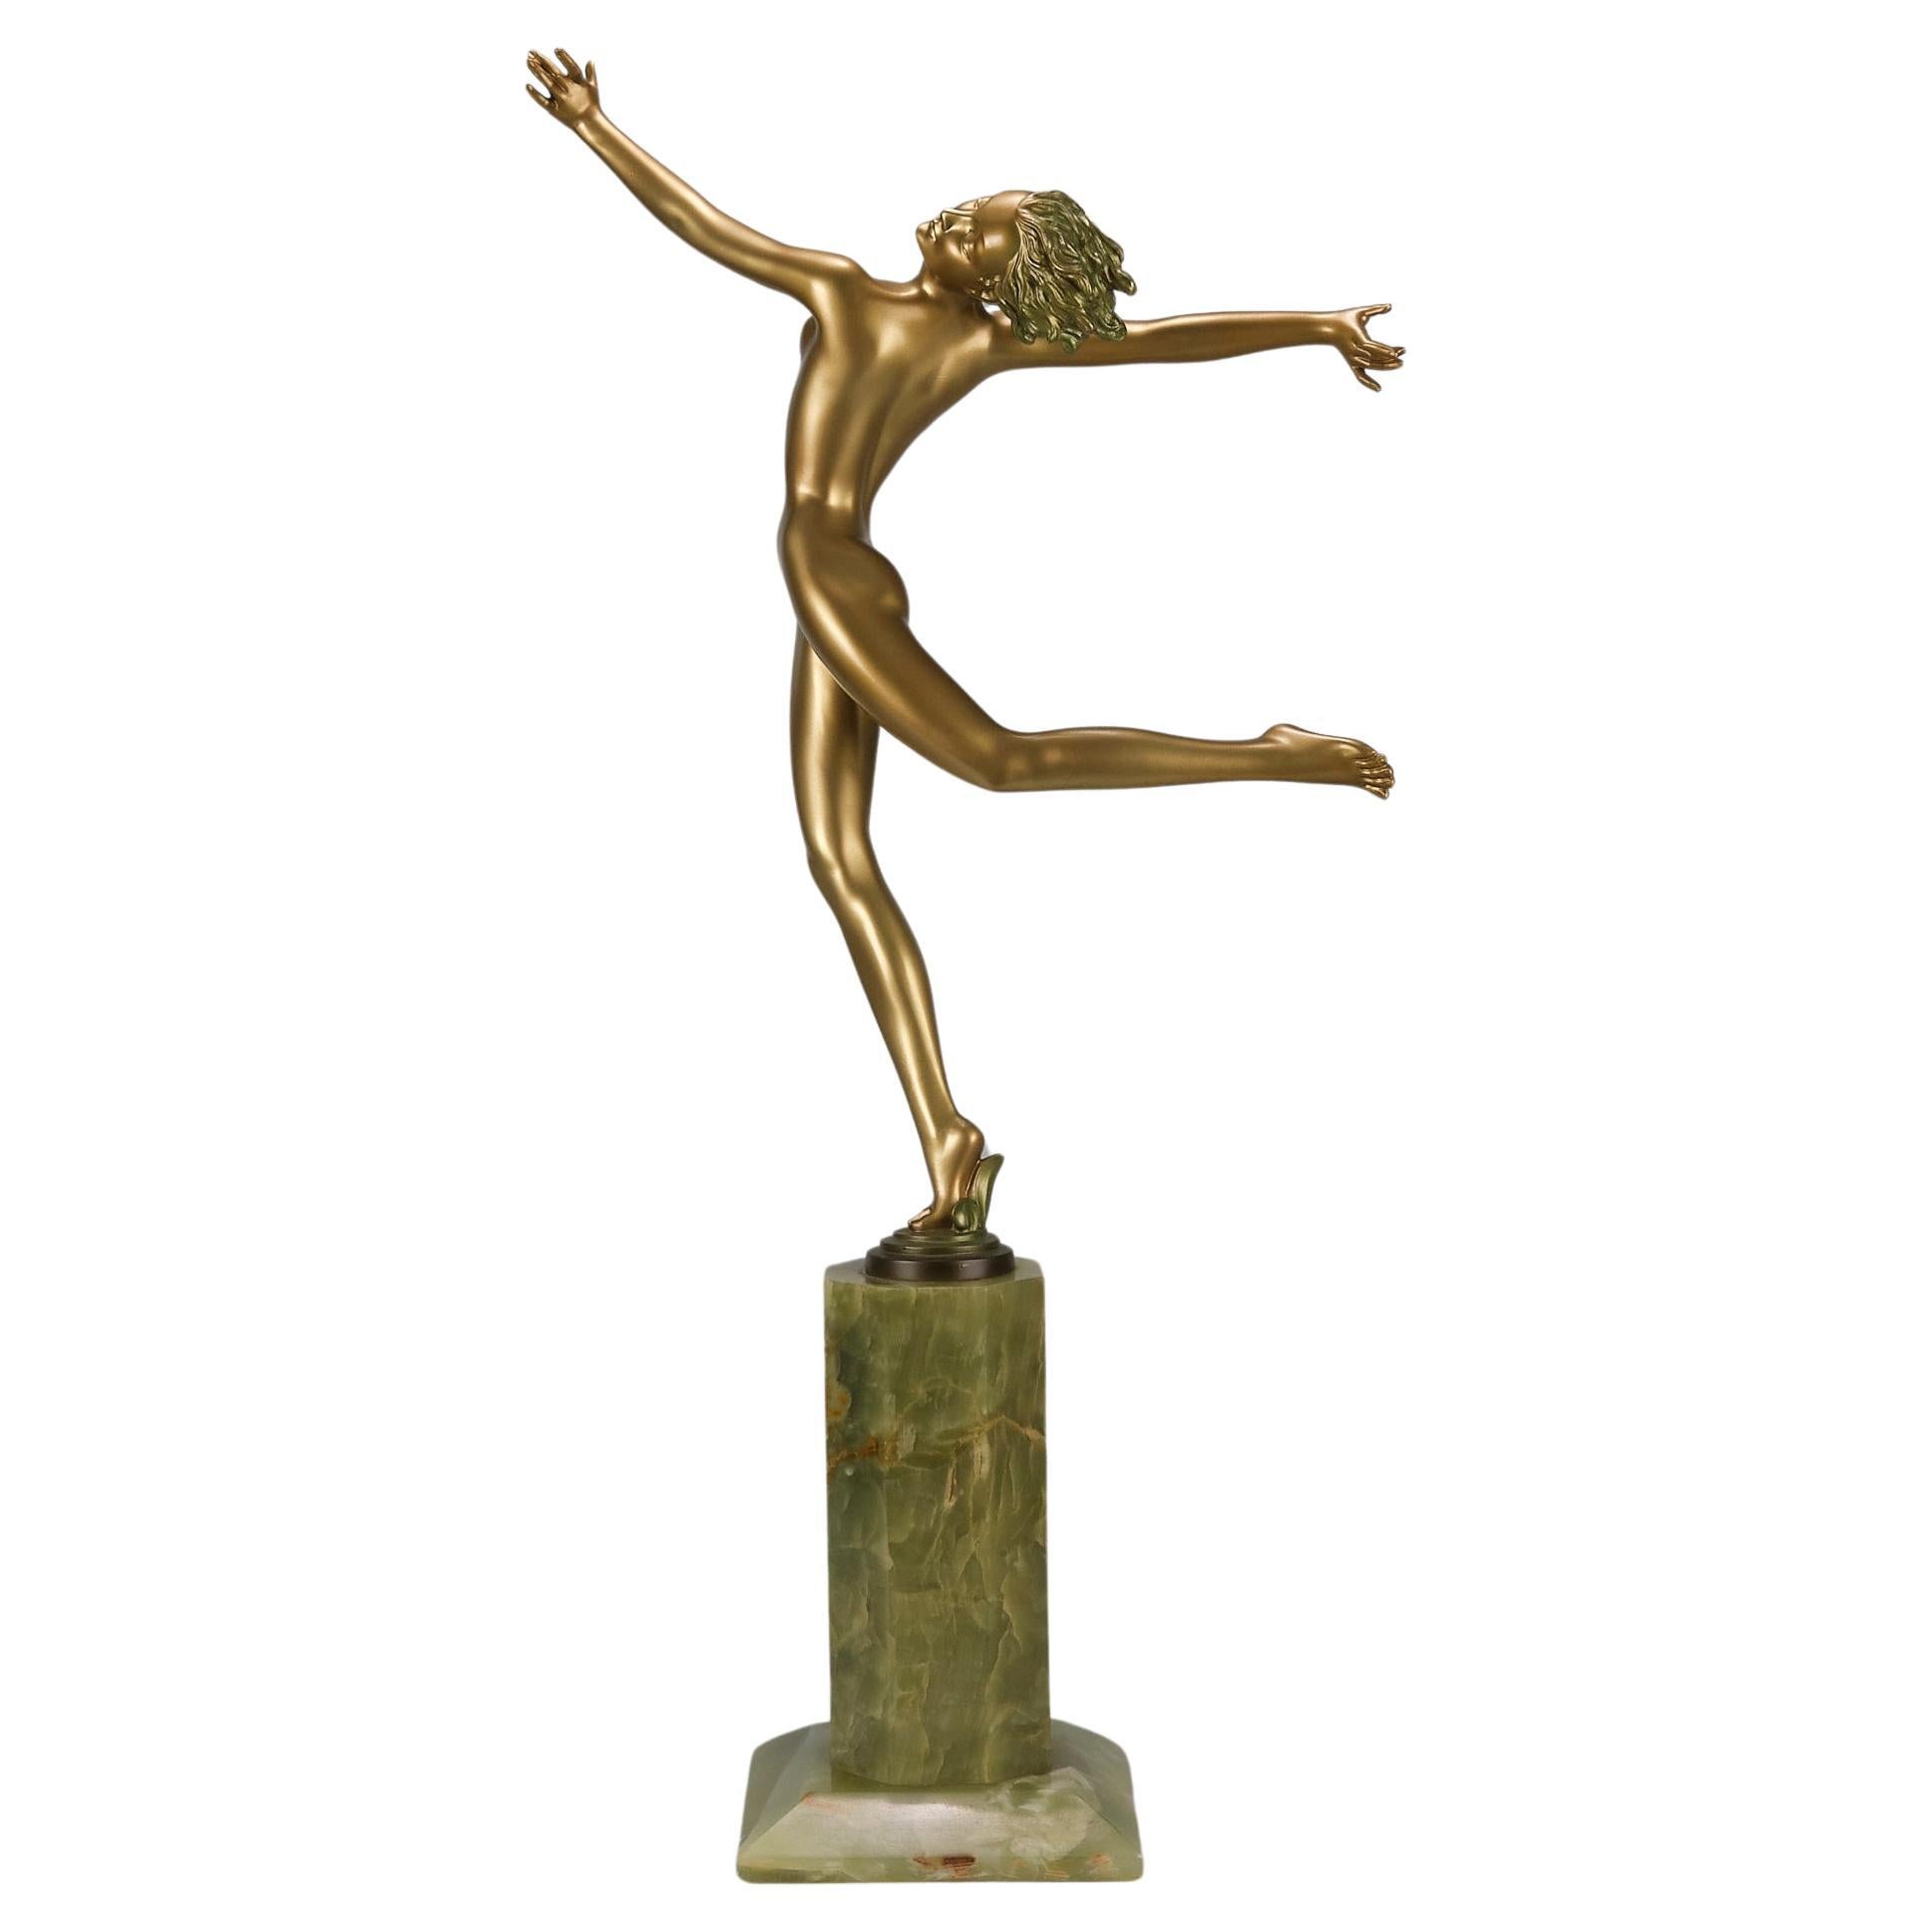 Early 20th Century Cold-Painted Bronze Sculpture "Deco Dancer" by Josef Lorenzl For Sale